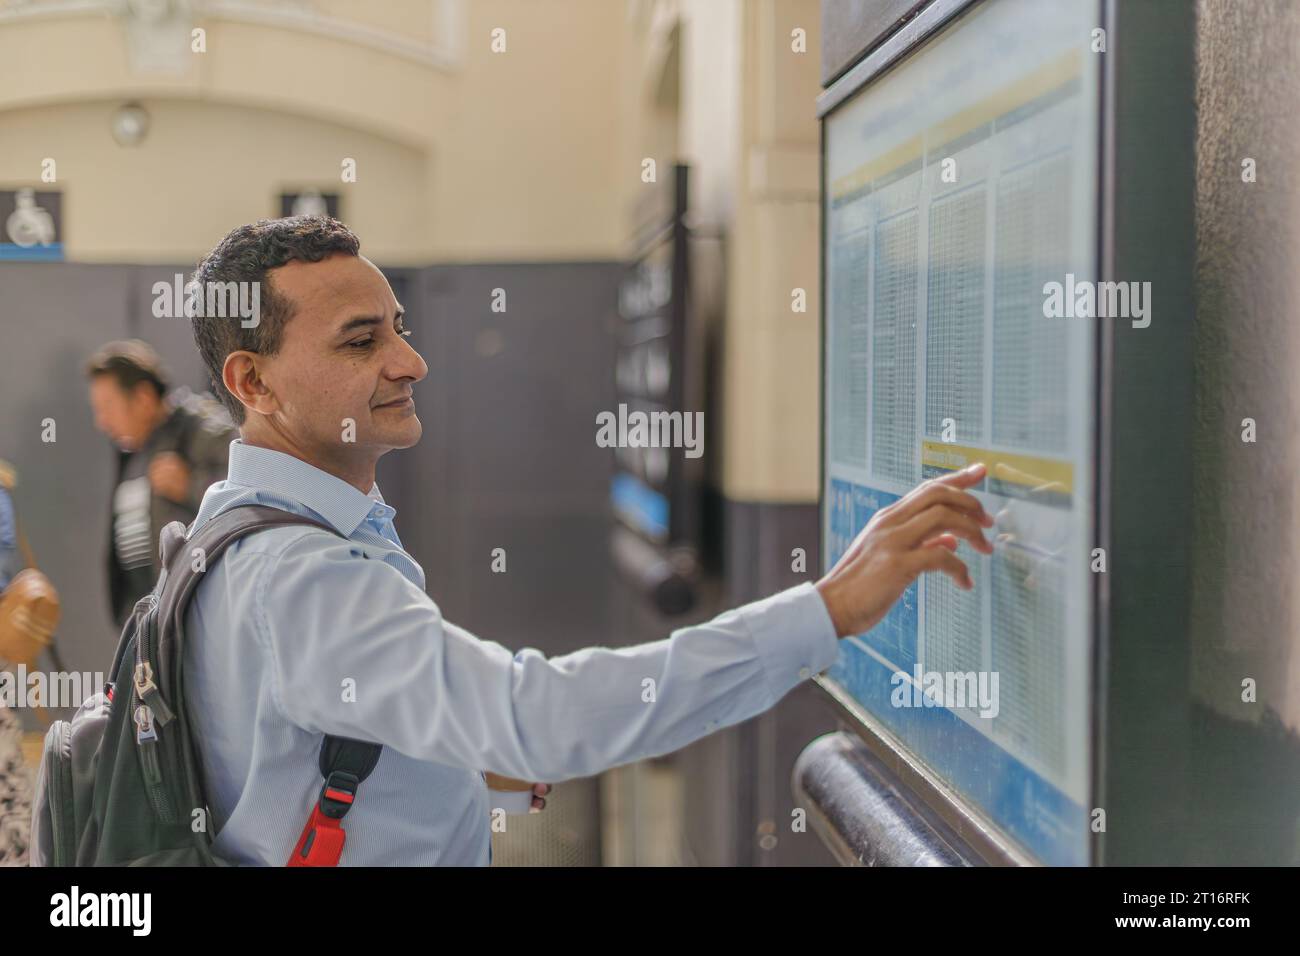 Latin man in shirt looking at billboard with train schedules. Stock Photo